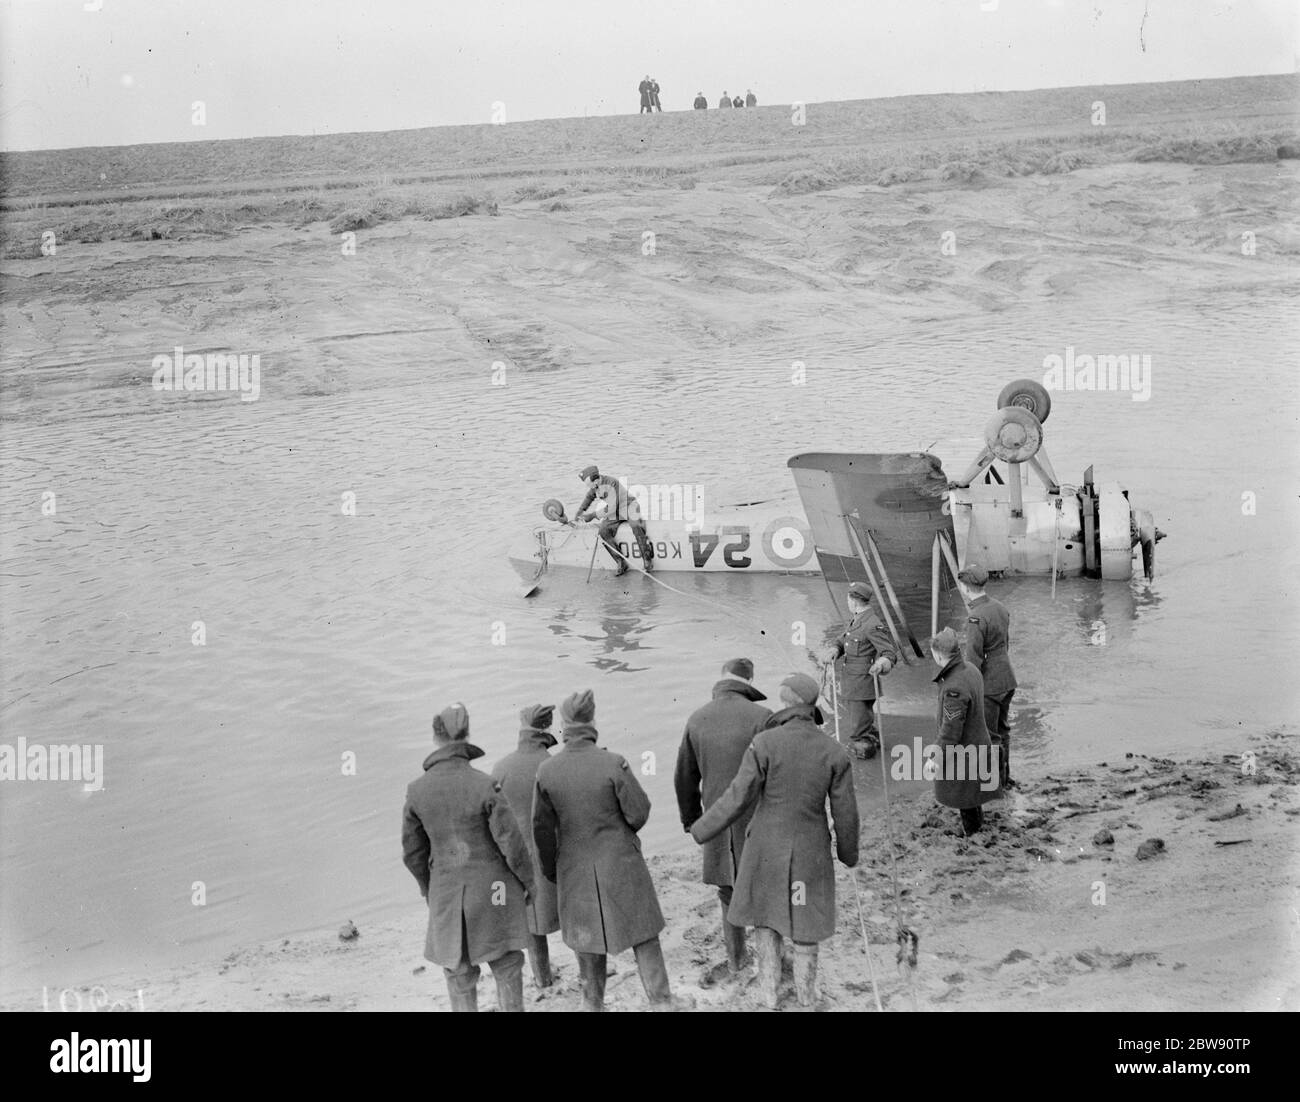 Royal Air Force personnel attempt to recover the Avro 621 Tutor K6090 plane at low tide with a rope round the landing strut of the aircraft in the hope of pulling it to drier land . The plane is lying upside down in Dartford Creek following a crash . 31 January 1939 Stock Photo